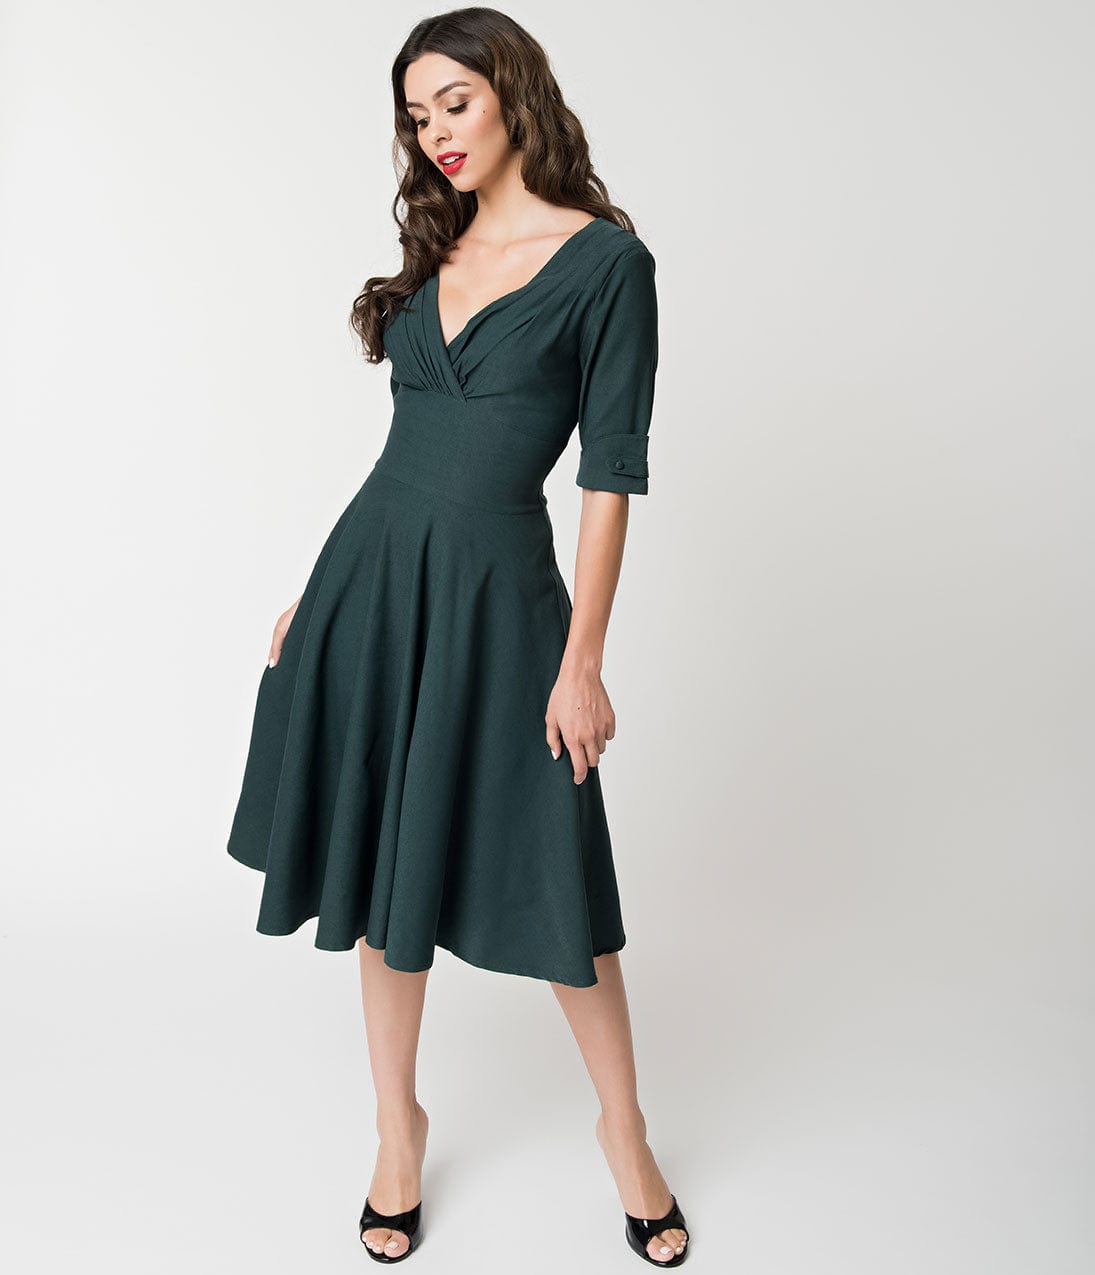 Unique Vintage 1950s Dark Green Delores Swing Dress with Sleeves